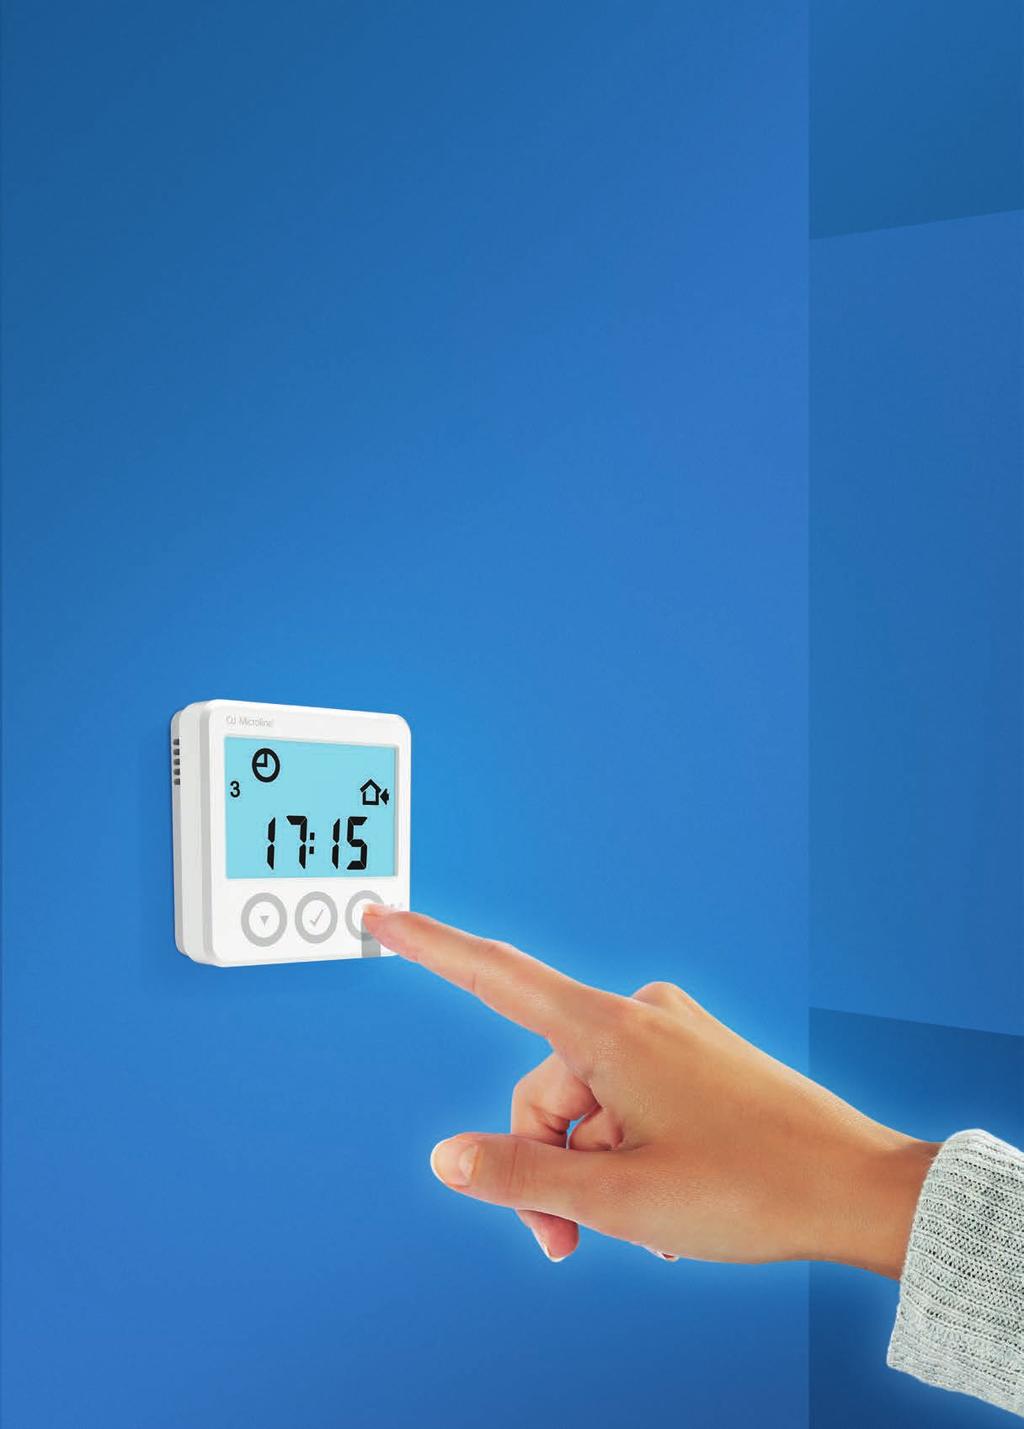 ...with beauty intuitive operation DESIGNED FOR COMFORTABLE LIVING The modern thermostat provides so much more than simple temperature control it s a personalised and intuitive device designed to put